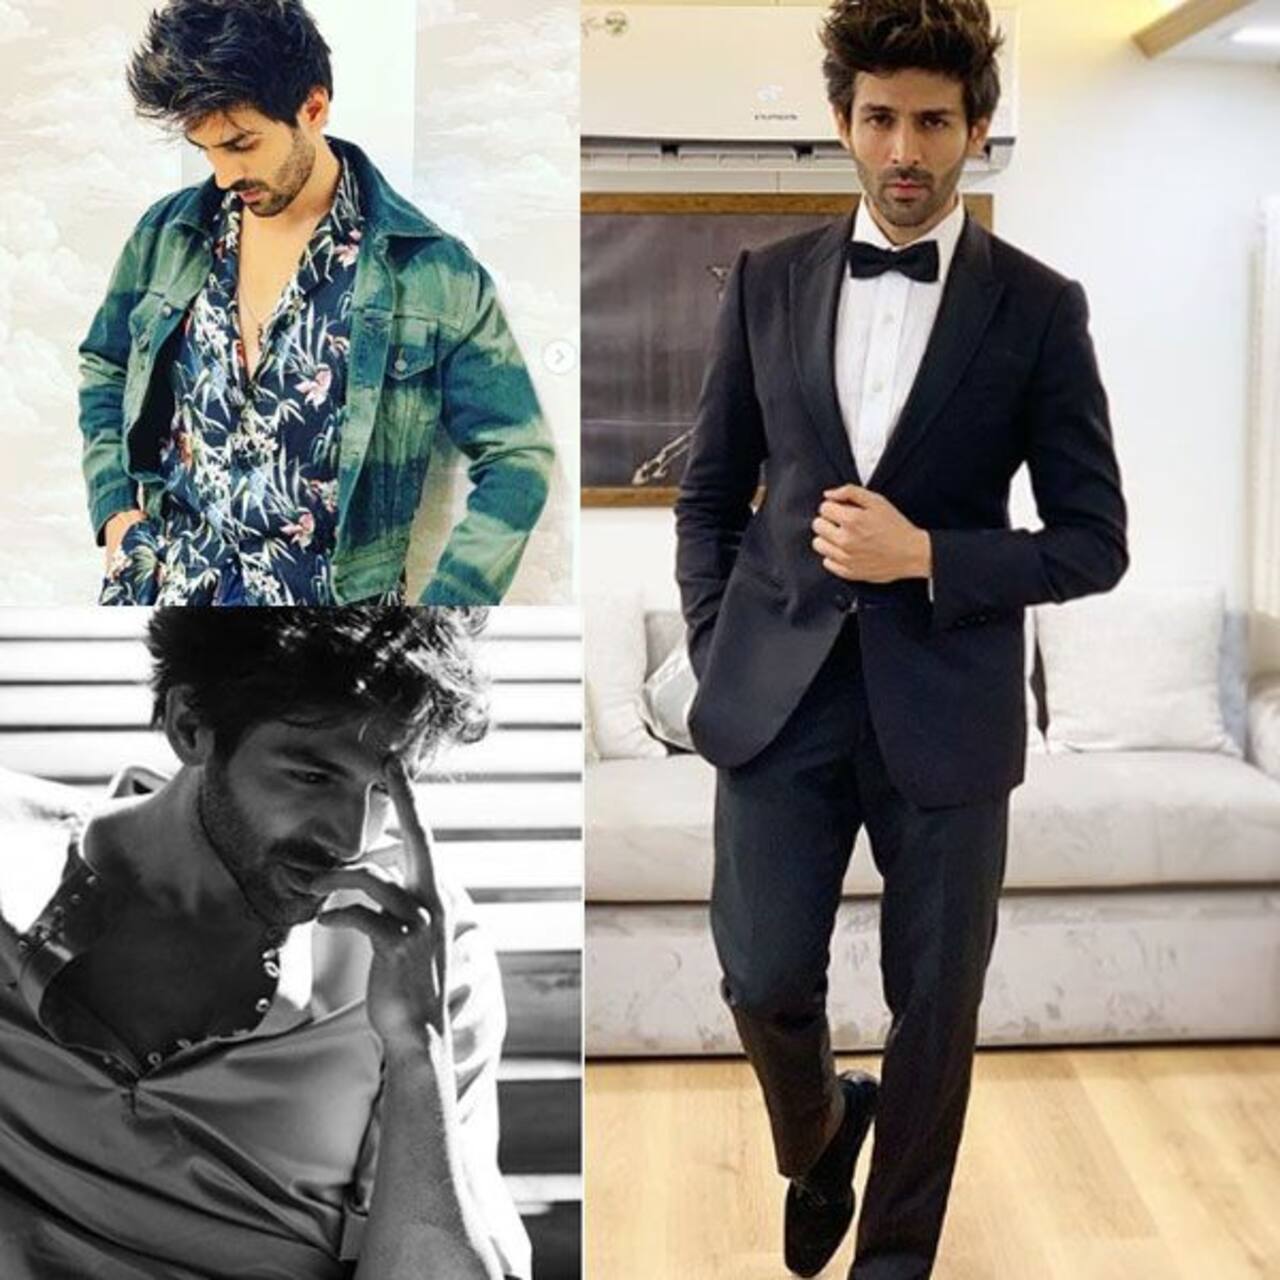 Kartik Aaryan has the whole of internet looking up and checking him out - we can tell you why!